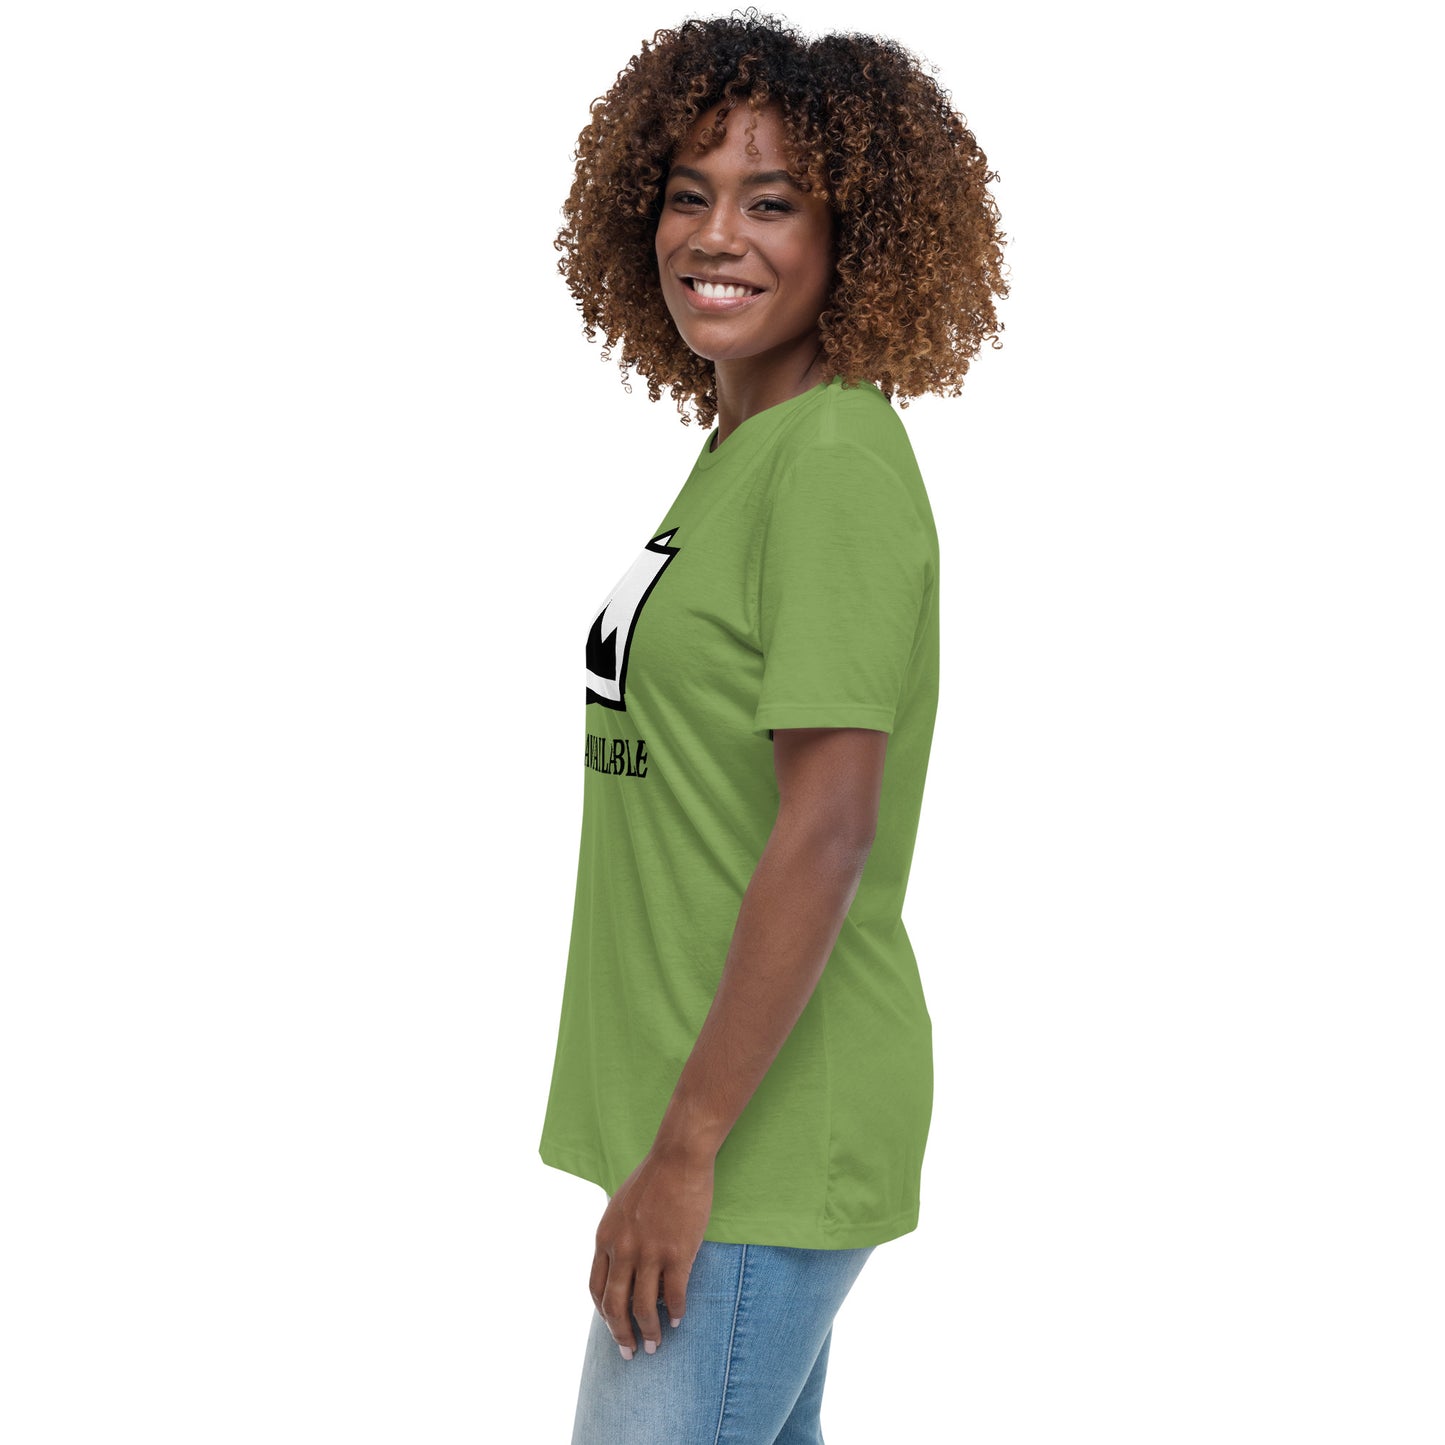 Women with leaf green t-shirt with image and text "no image available"